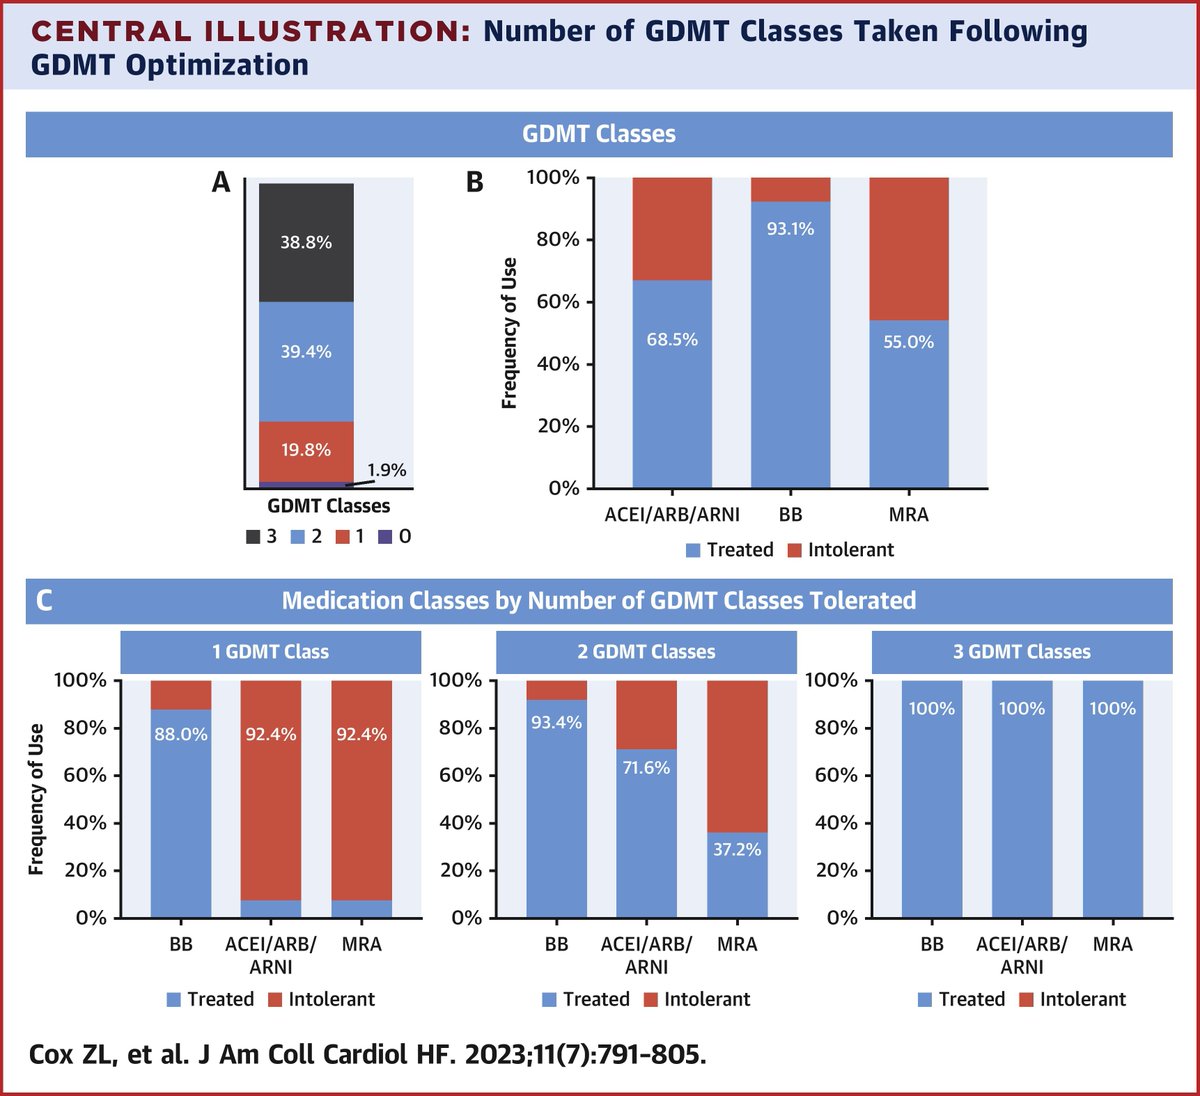 In #COAPT, #HeartFailure specialists optimized #GDMT & documented med/dose intolerances prior to enrollment. 38.8%, 39.4% & 19.8% of pts tolerated 3, 2, & 1 GDMT classes. BB were best tolerated (93.1%) followed by ACEI/ARB/ARNI (68.5%) &MRA (55.0%) bit.ly/3pAxF9q #JACCHF